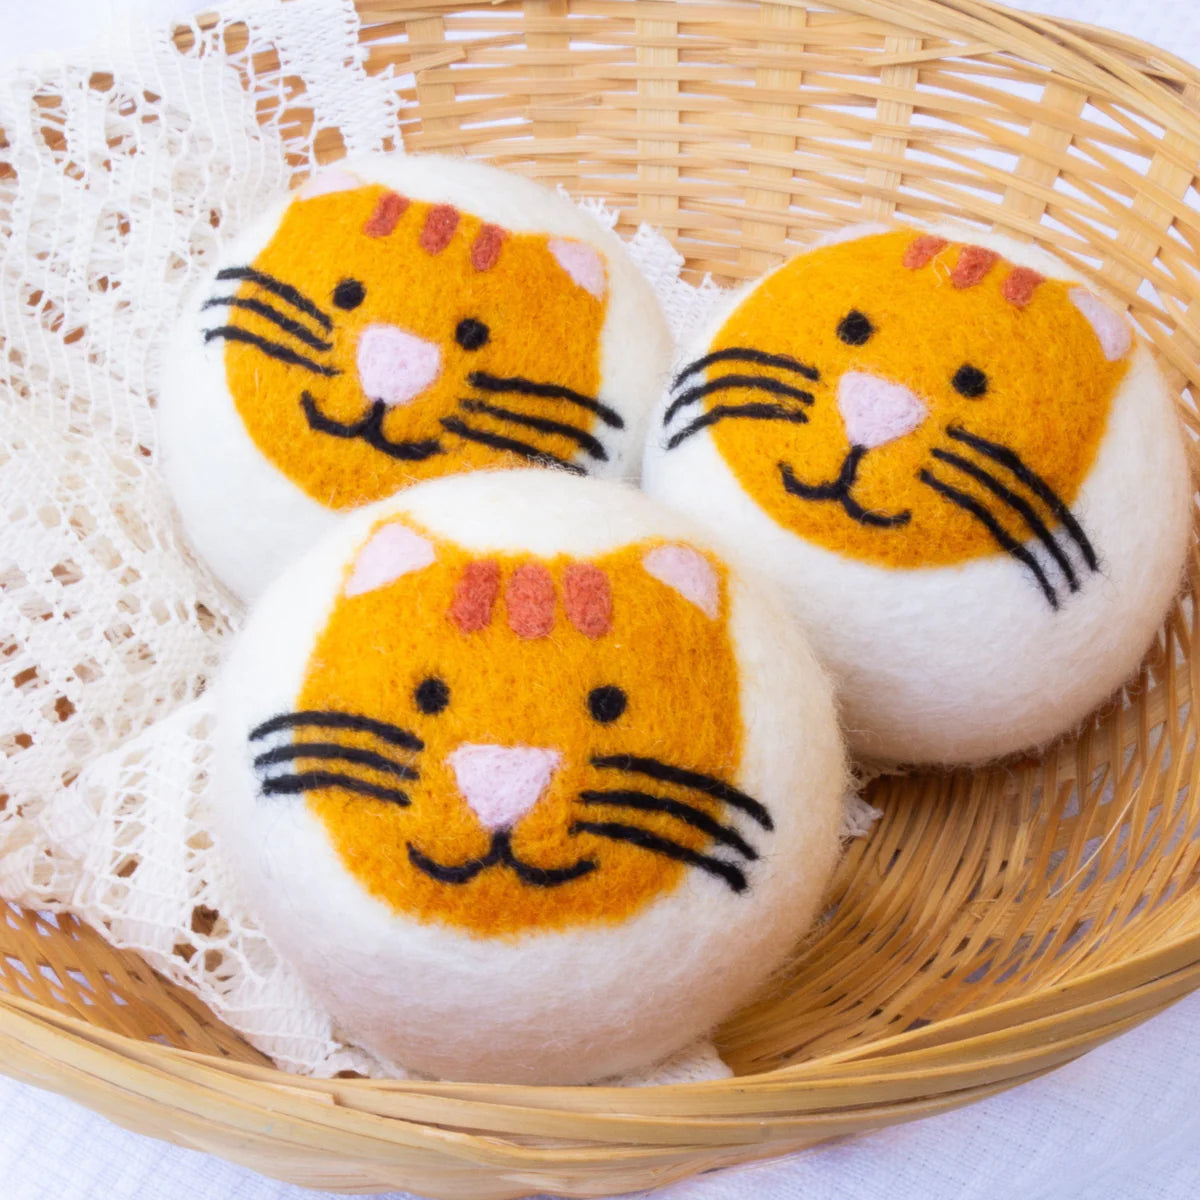 Friendsheep - Eco Dryer Ball Cool Cats (Set of 3)